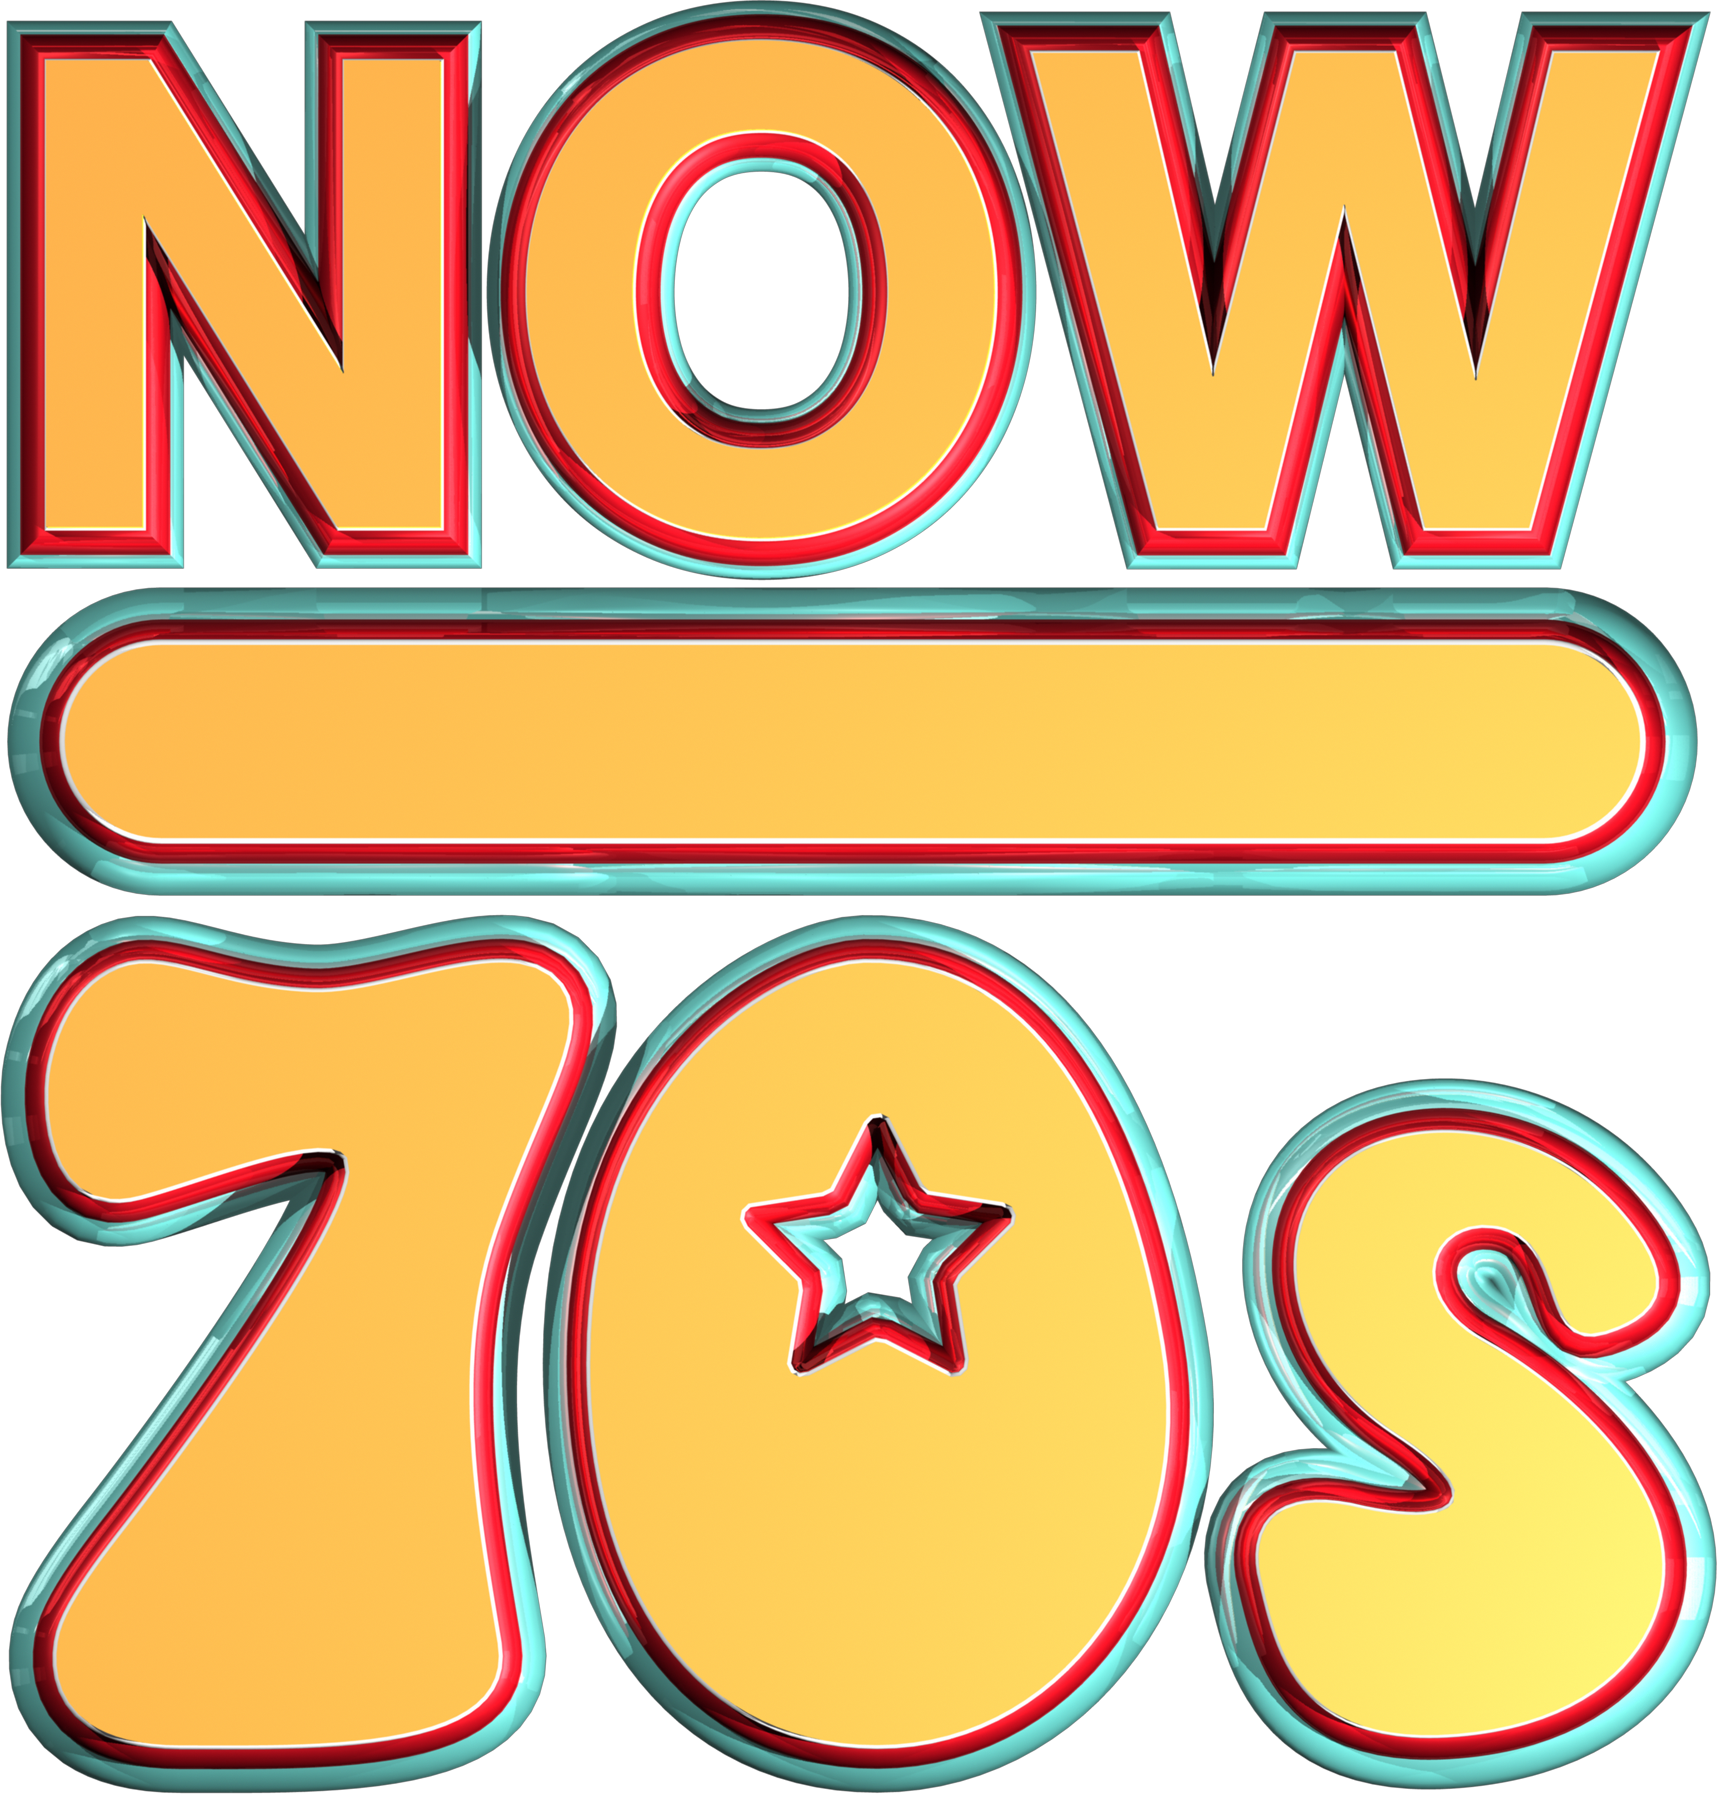 Now 70s